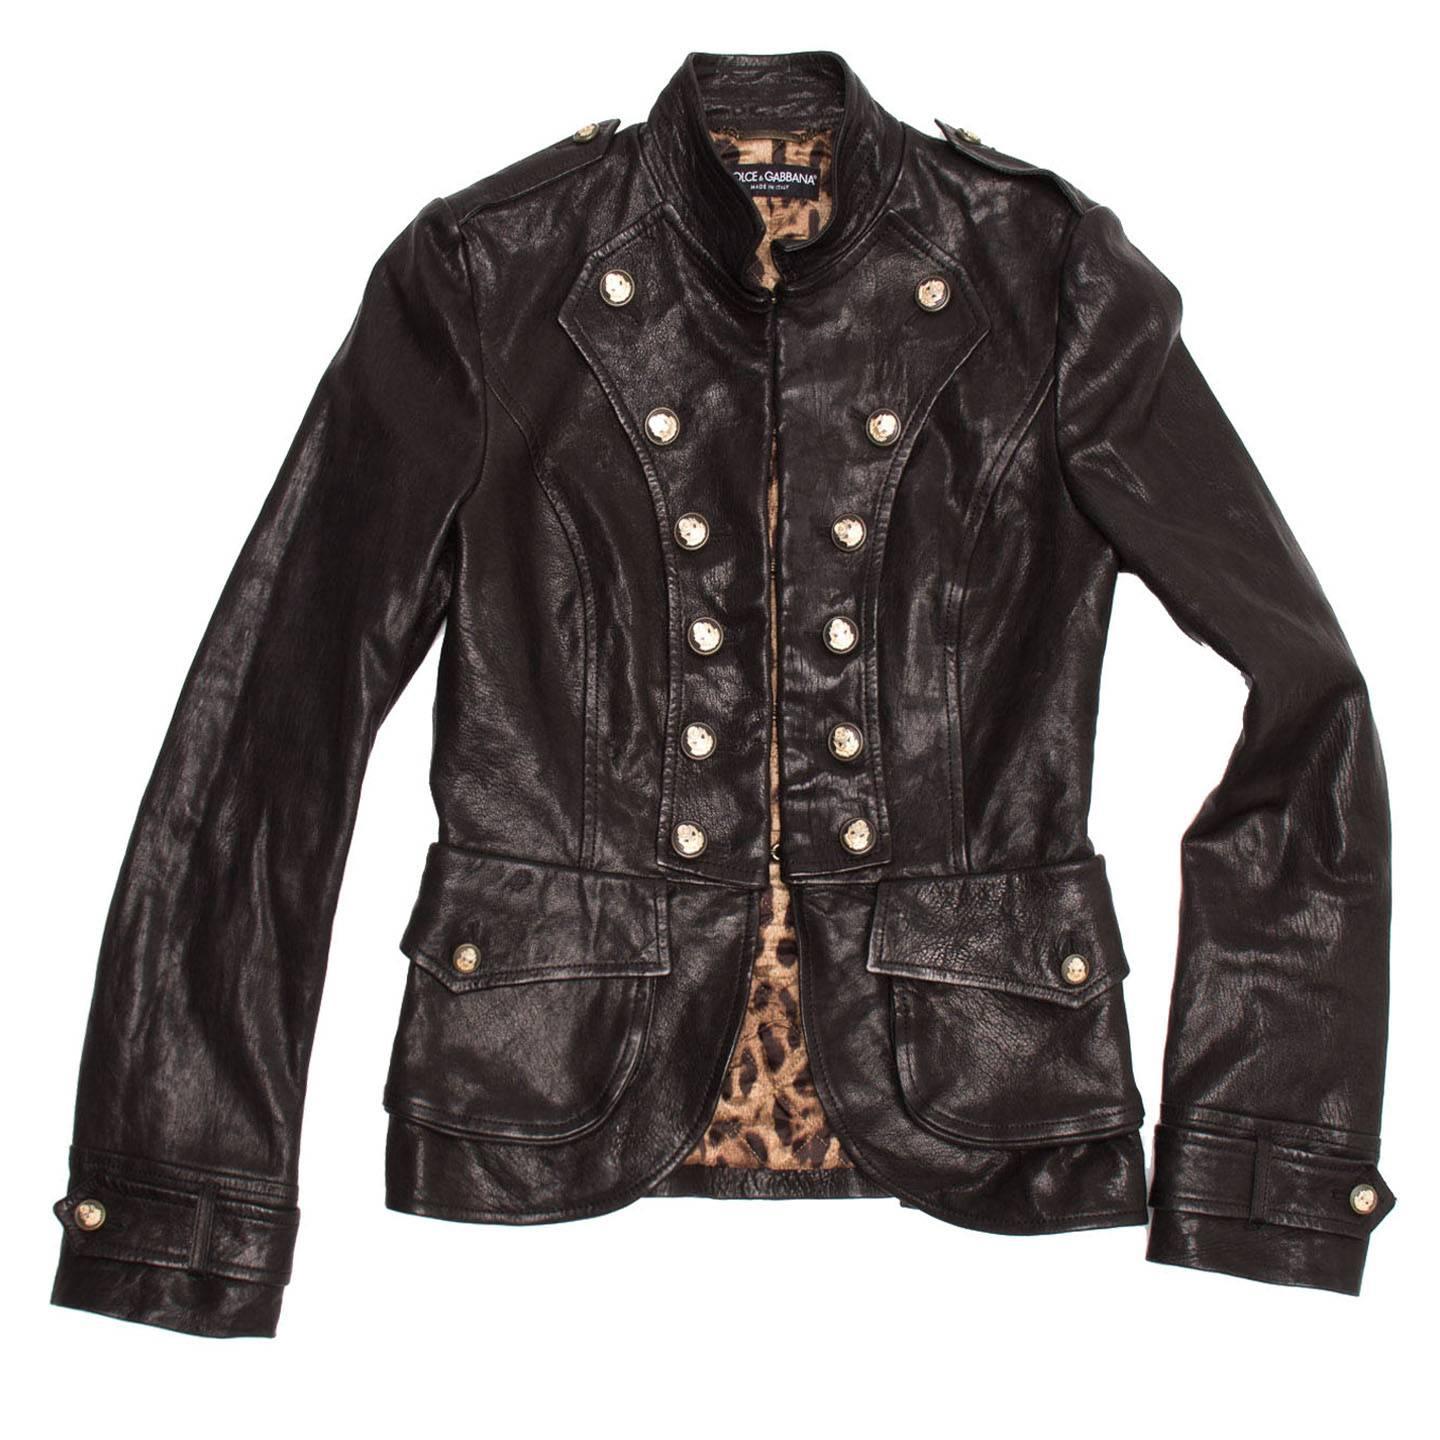 Black distressed leather fit and flare waist length military jacket with signature leopard print interior, broad patch/flap pockets, mandarin collar, and gold button detailing.

Size  44 Italian sizing

Condition  Excellent: worn a few times